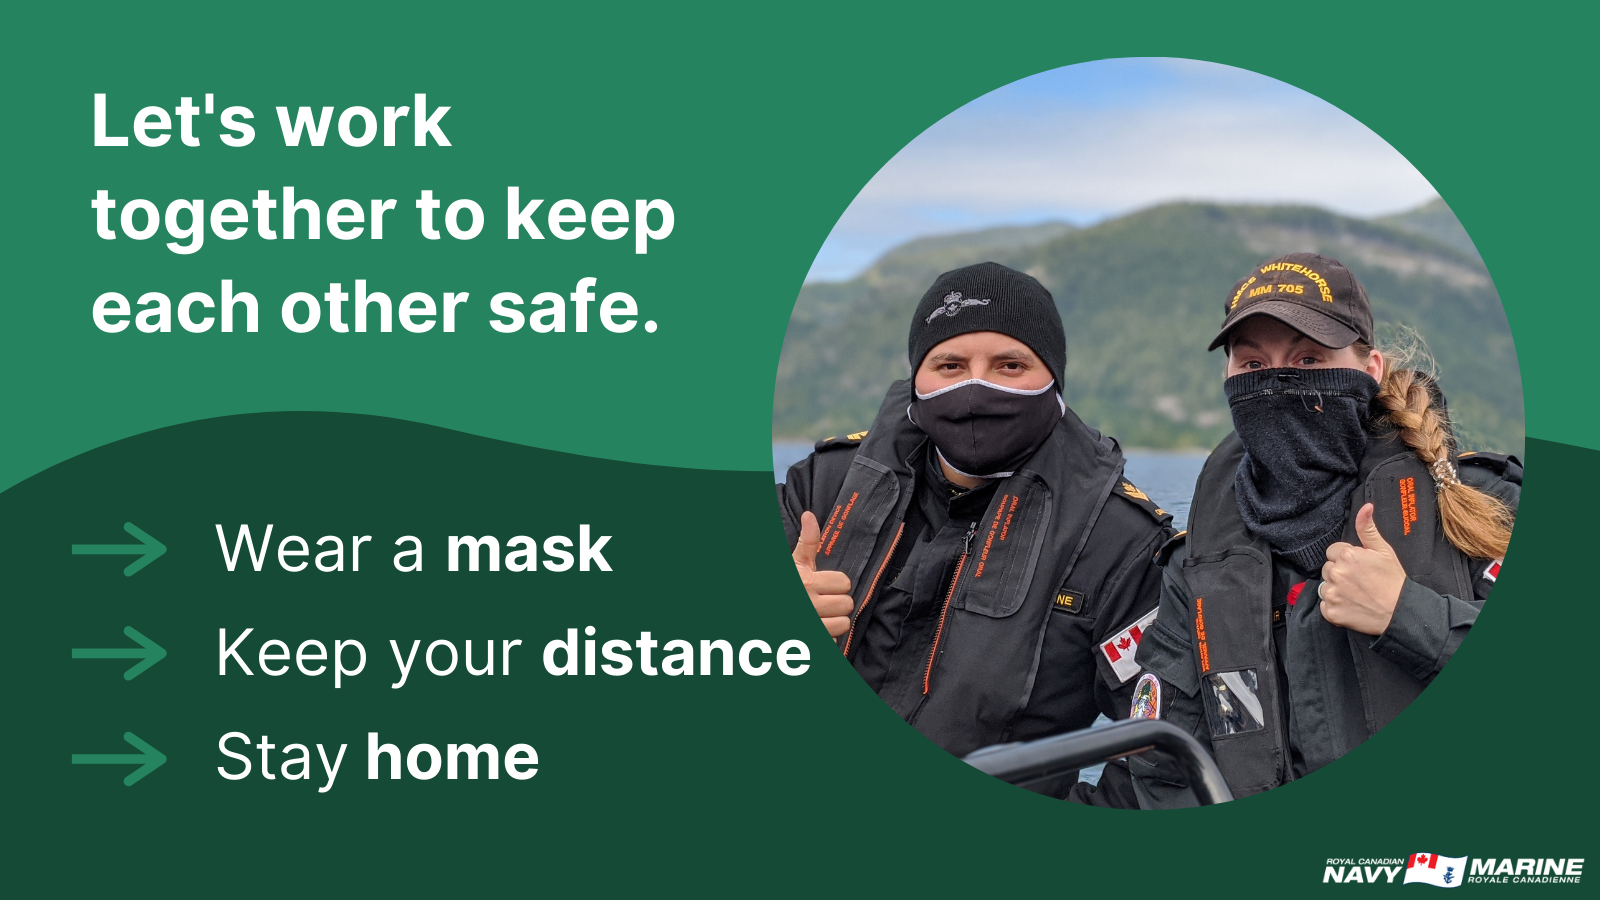 Slide - Let's work together to keep each other safe. Wear a mask. Keep your distance. Stay home.